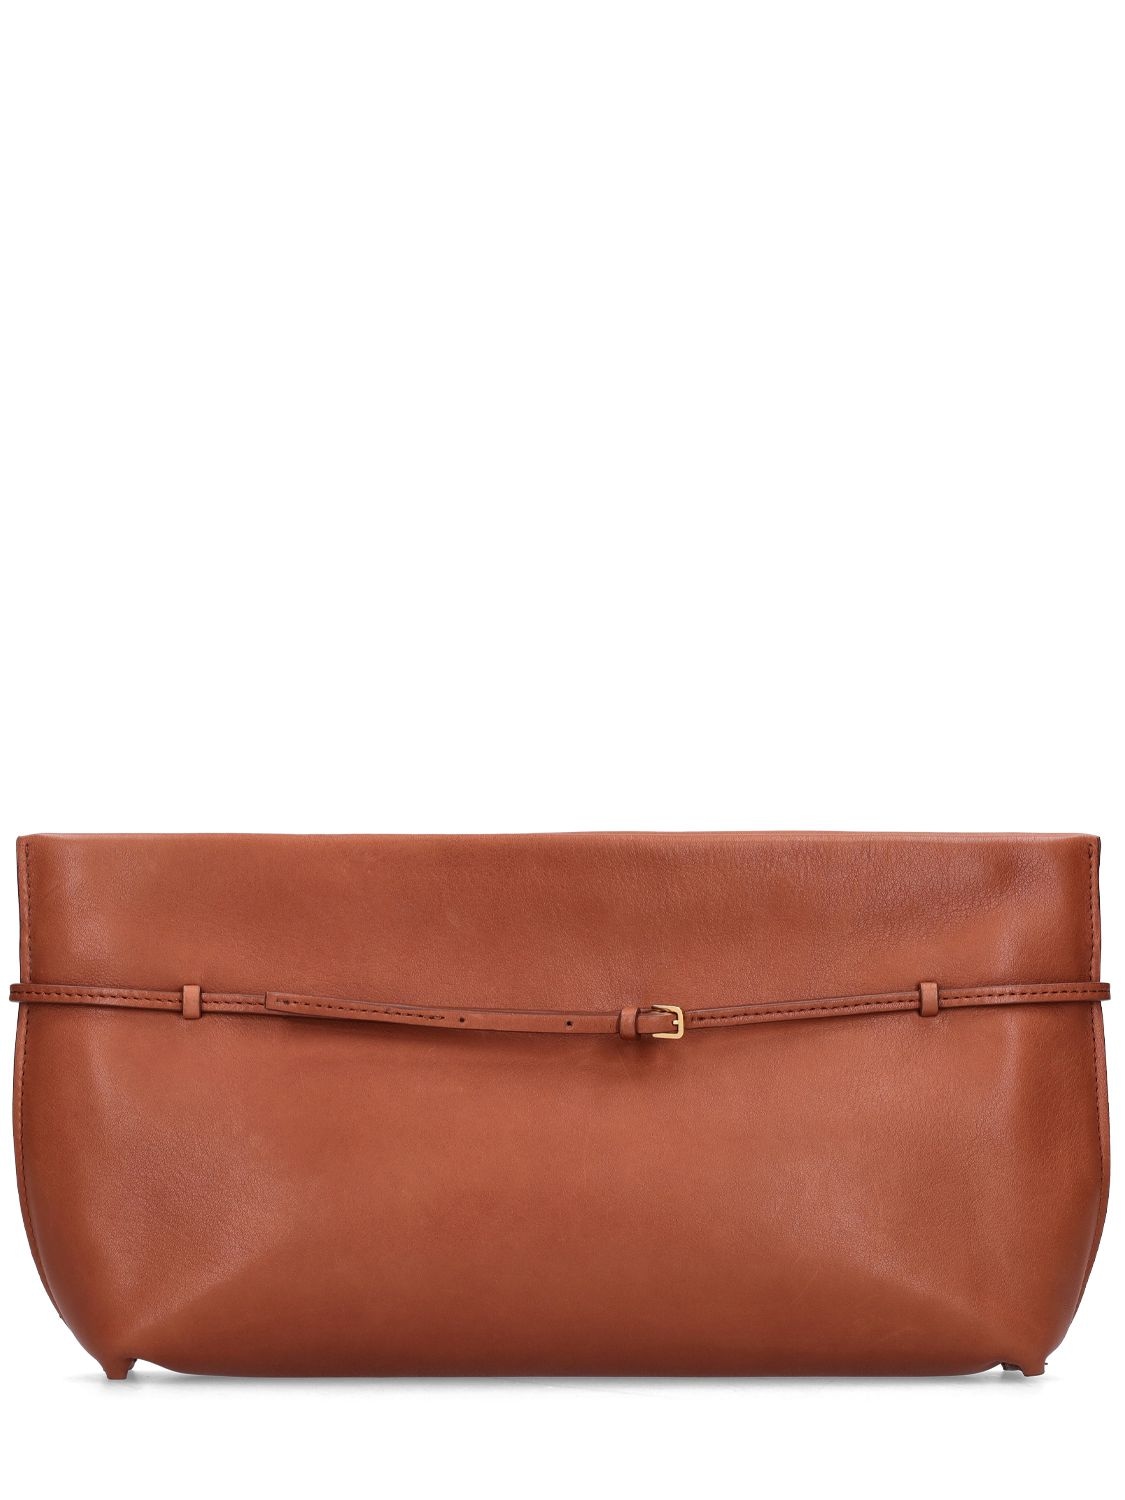 The Row Sienna Saddle Leather Clutch In Brown | ModeSens